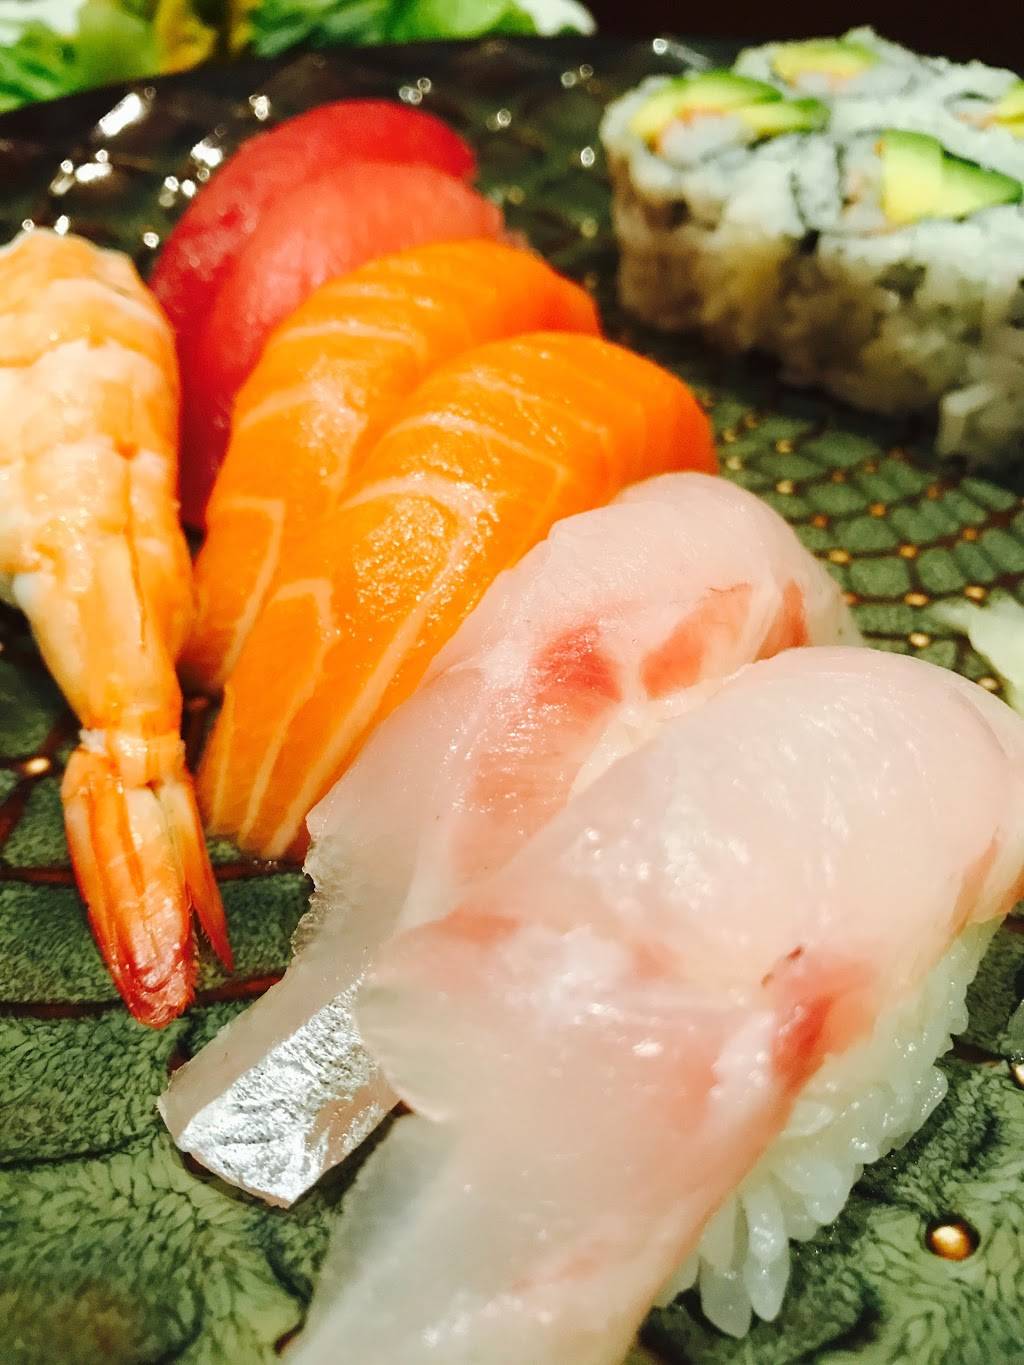 Ginza Sushi | restaurant | 4239, 251 E 35th St A, New York, NY 10016, USA | 2128893333 OR +1 212-889-3333